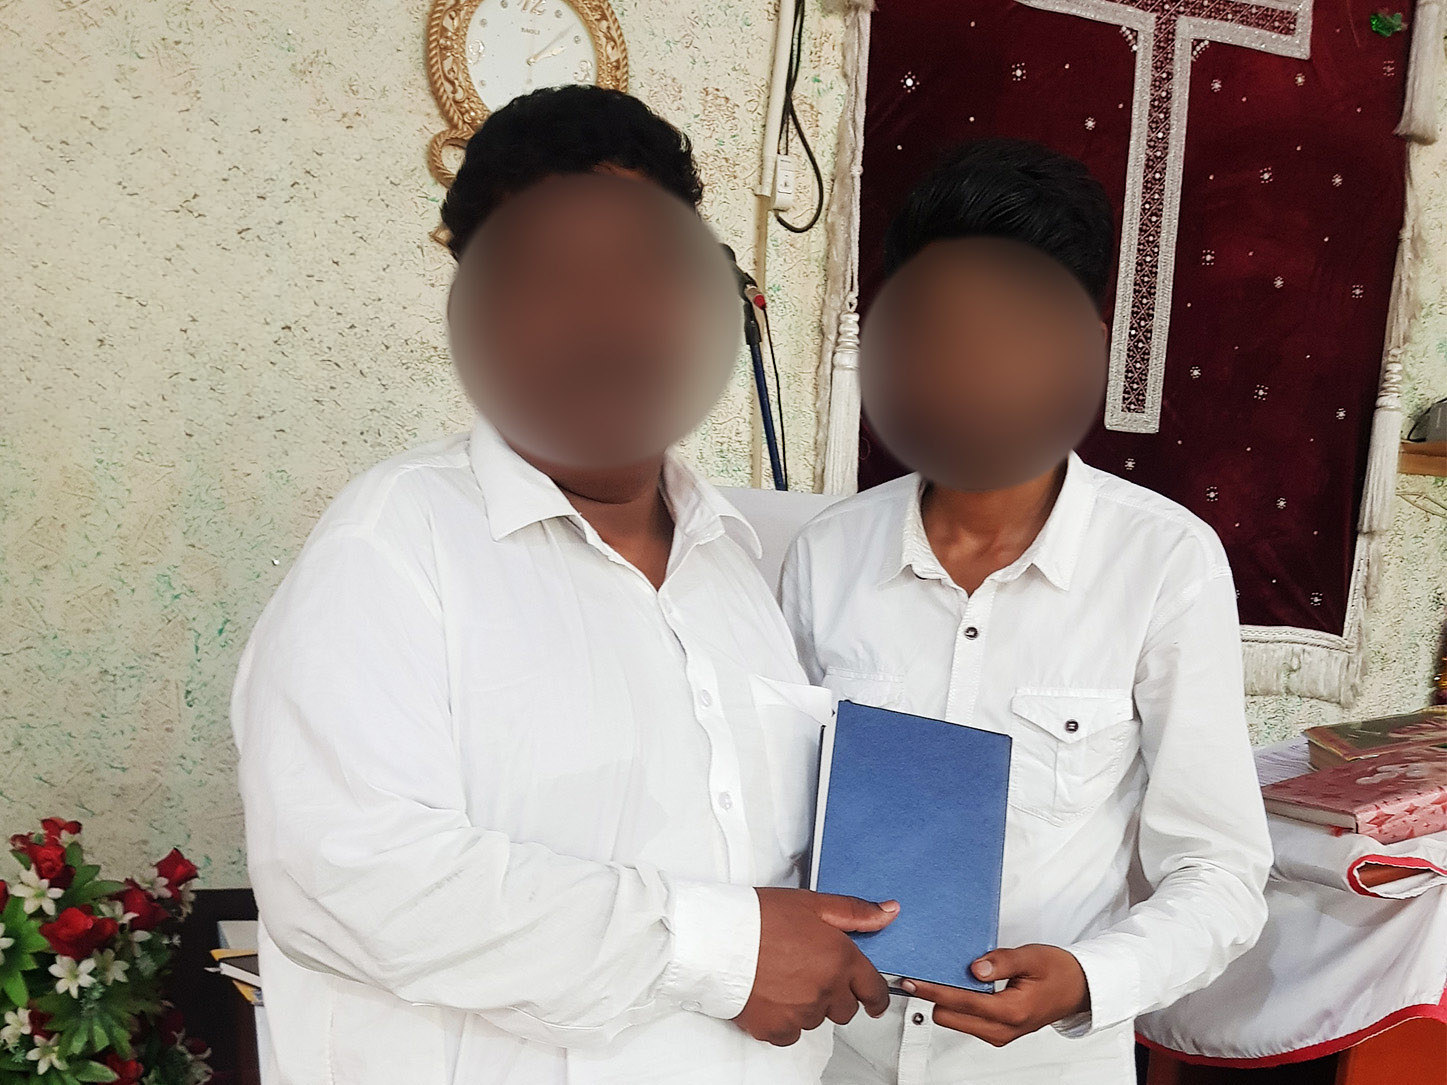 Two Pakistani Christians wearing white shirts holding their new Bible